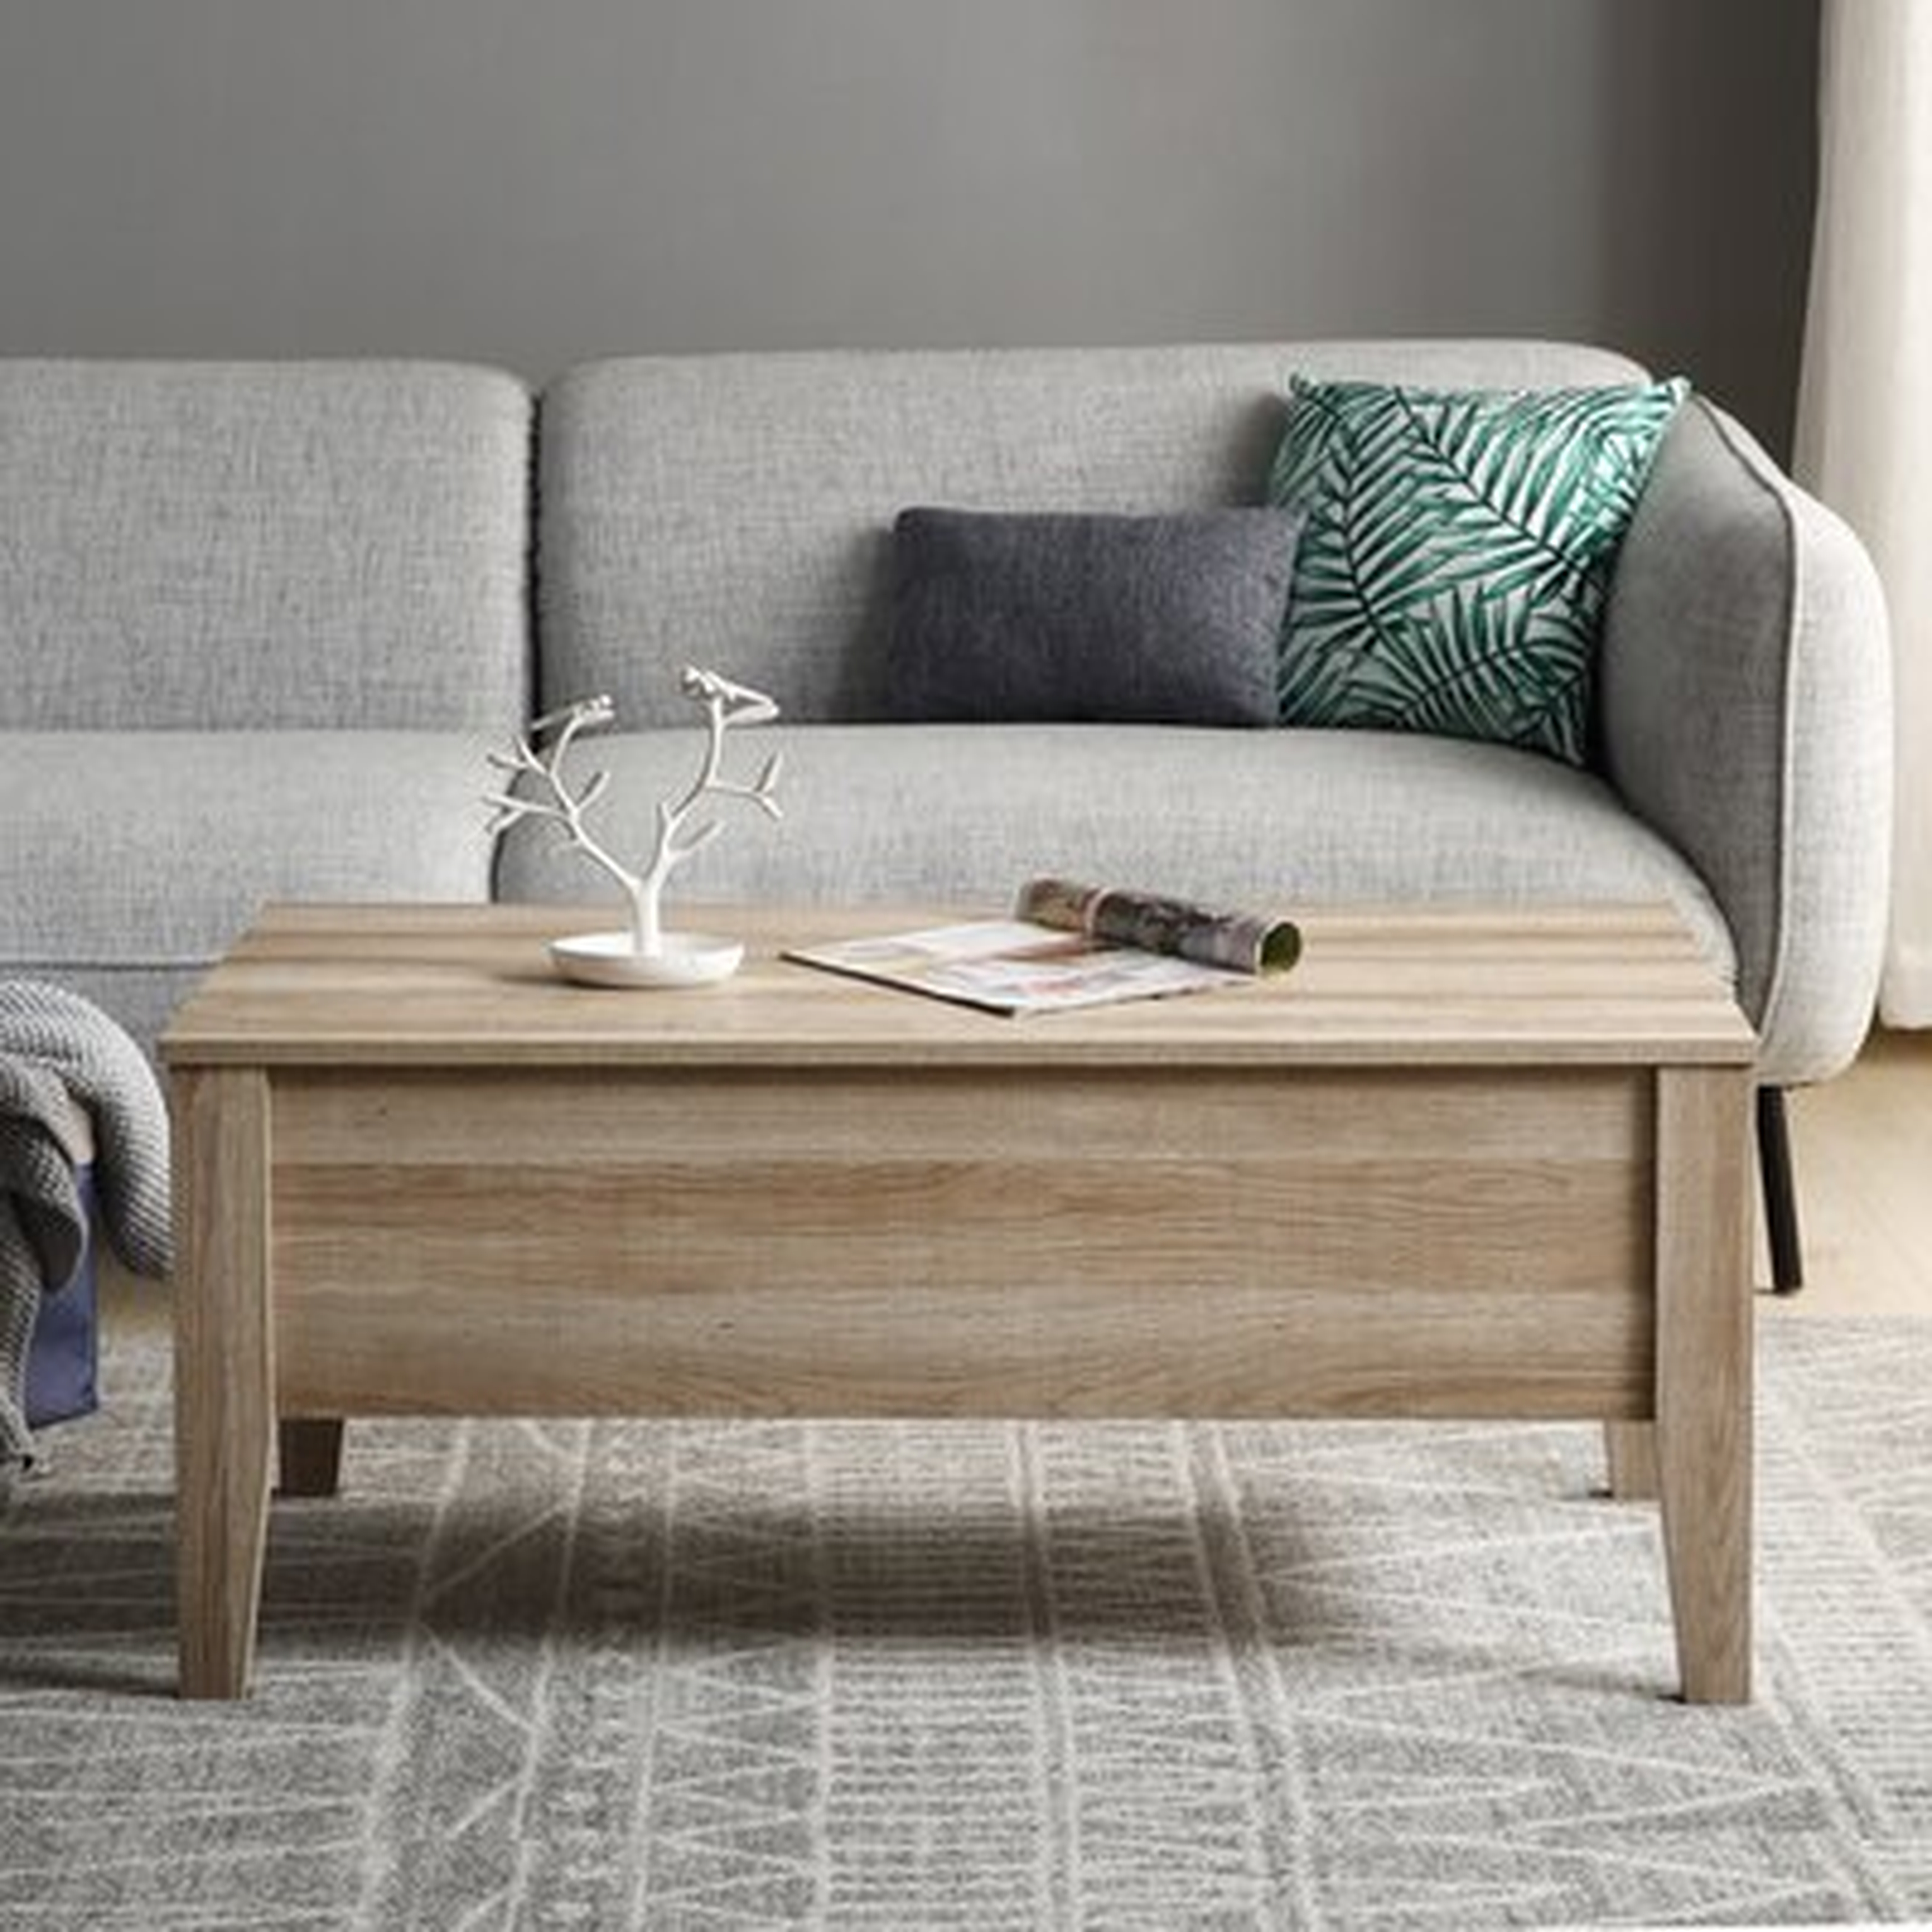 Modern Lift-Top Coffee Table With Storage, Sofa Table For Living Room,Old Wood - Wayfair